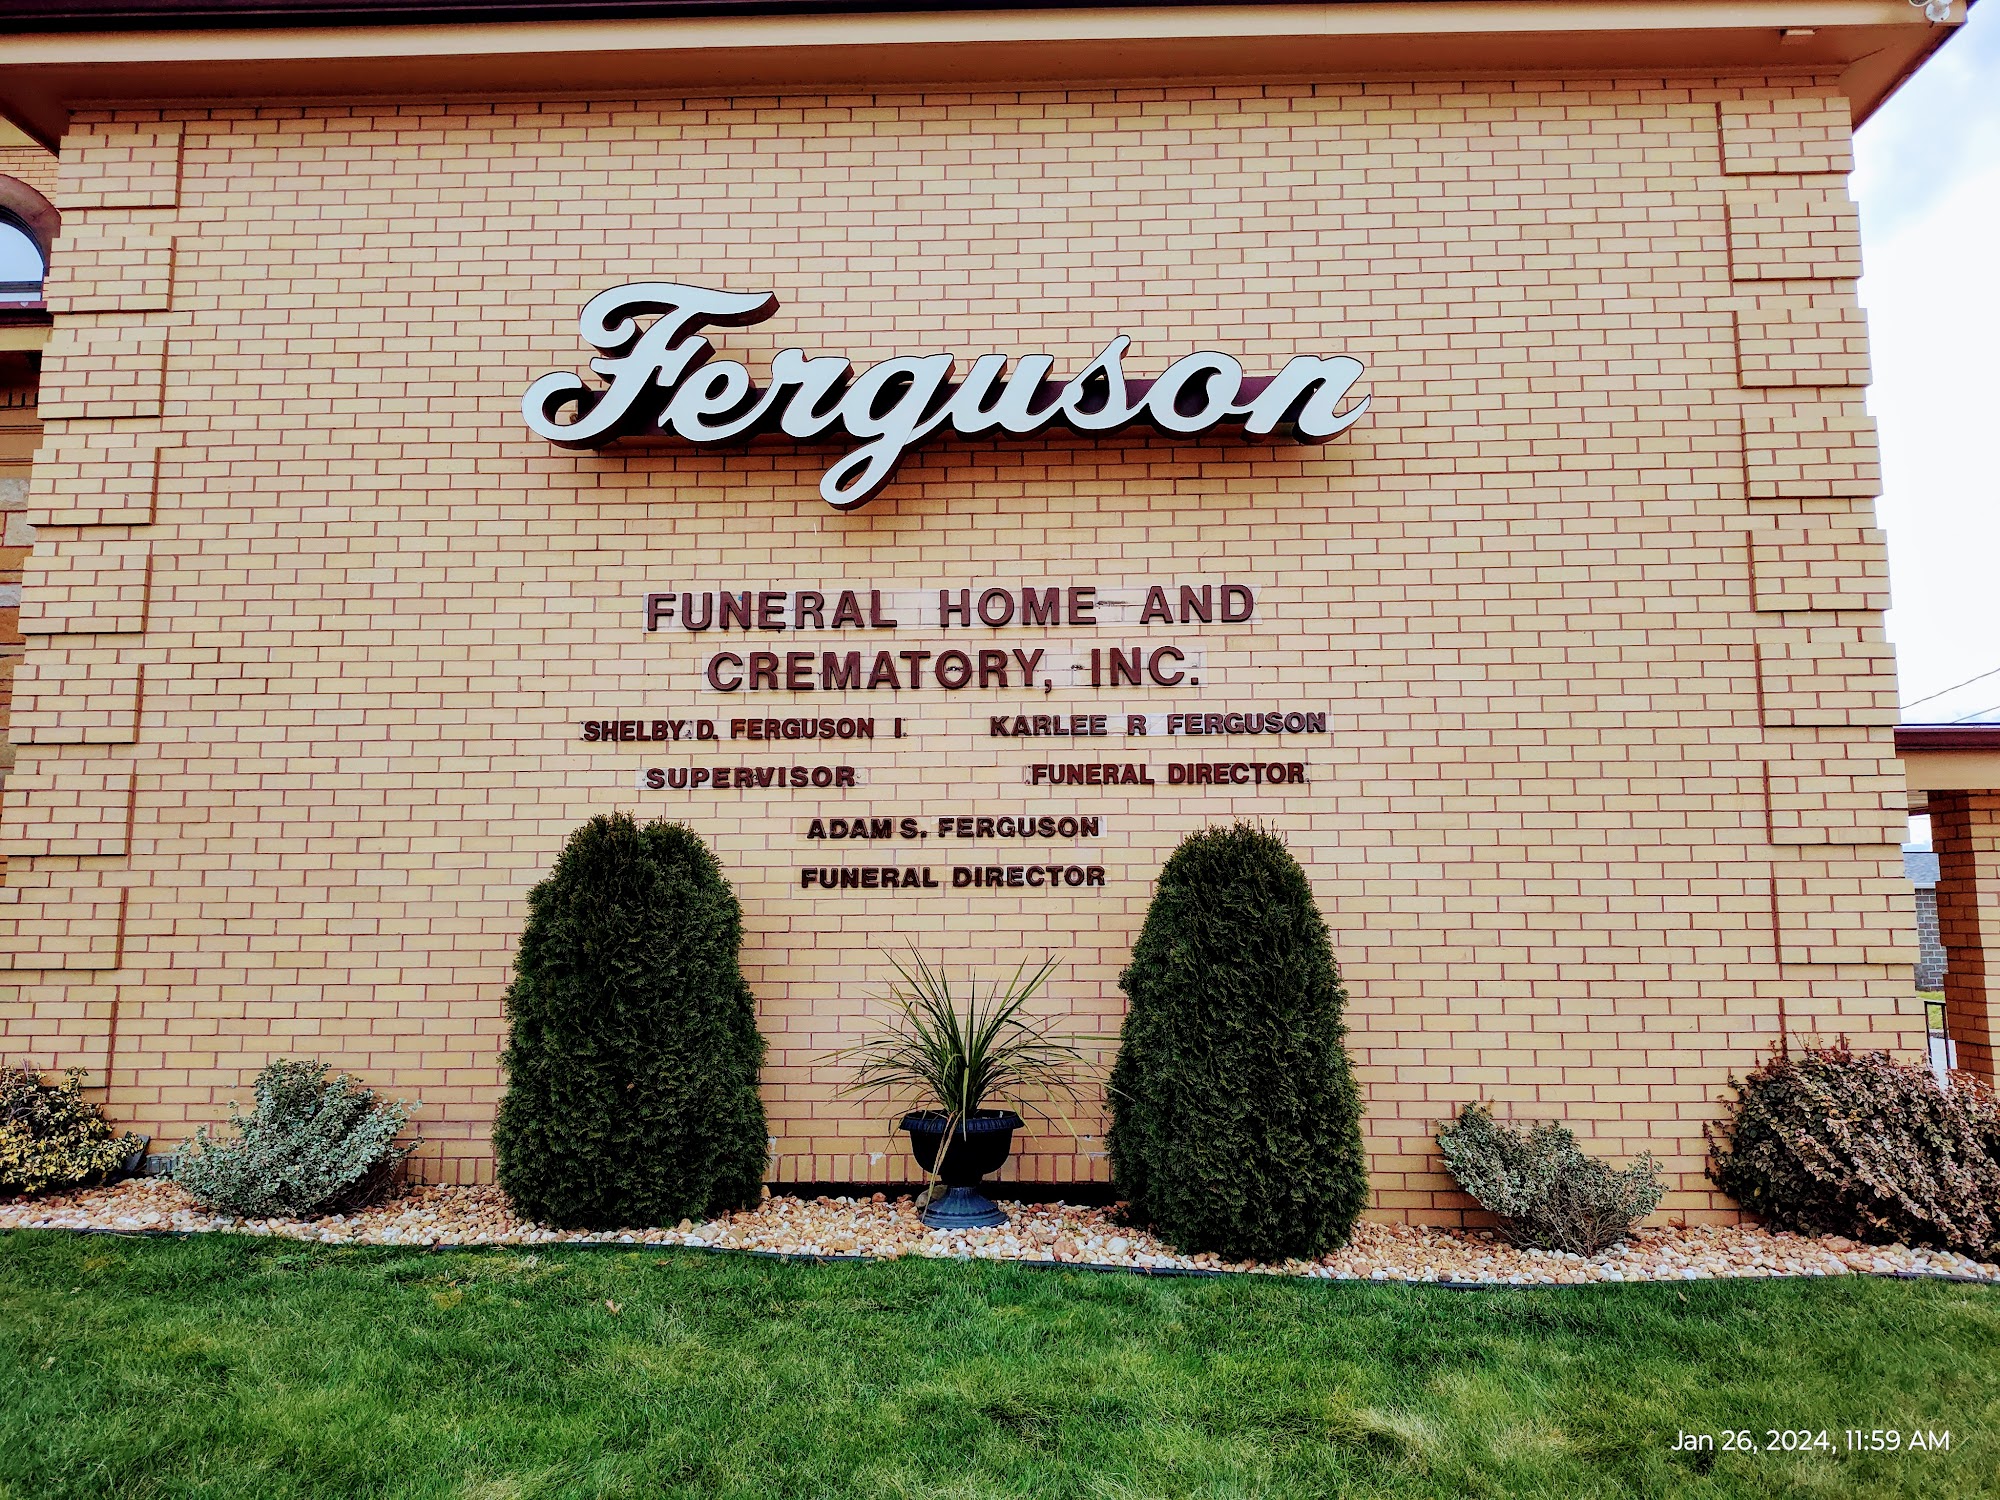 Ferguson Funeral Home and Crematory, Inc